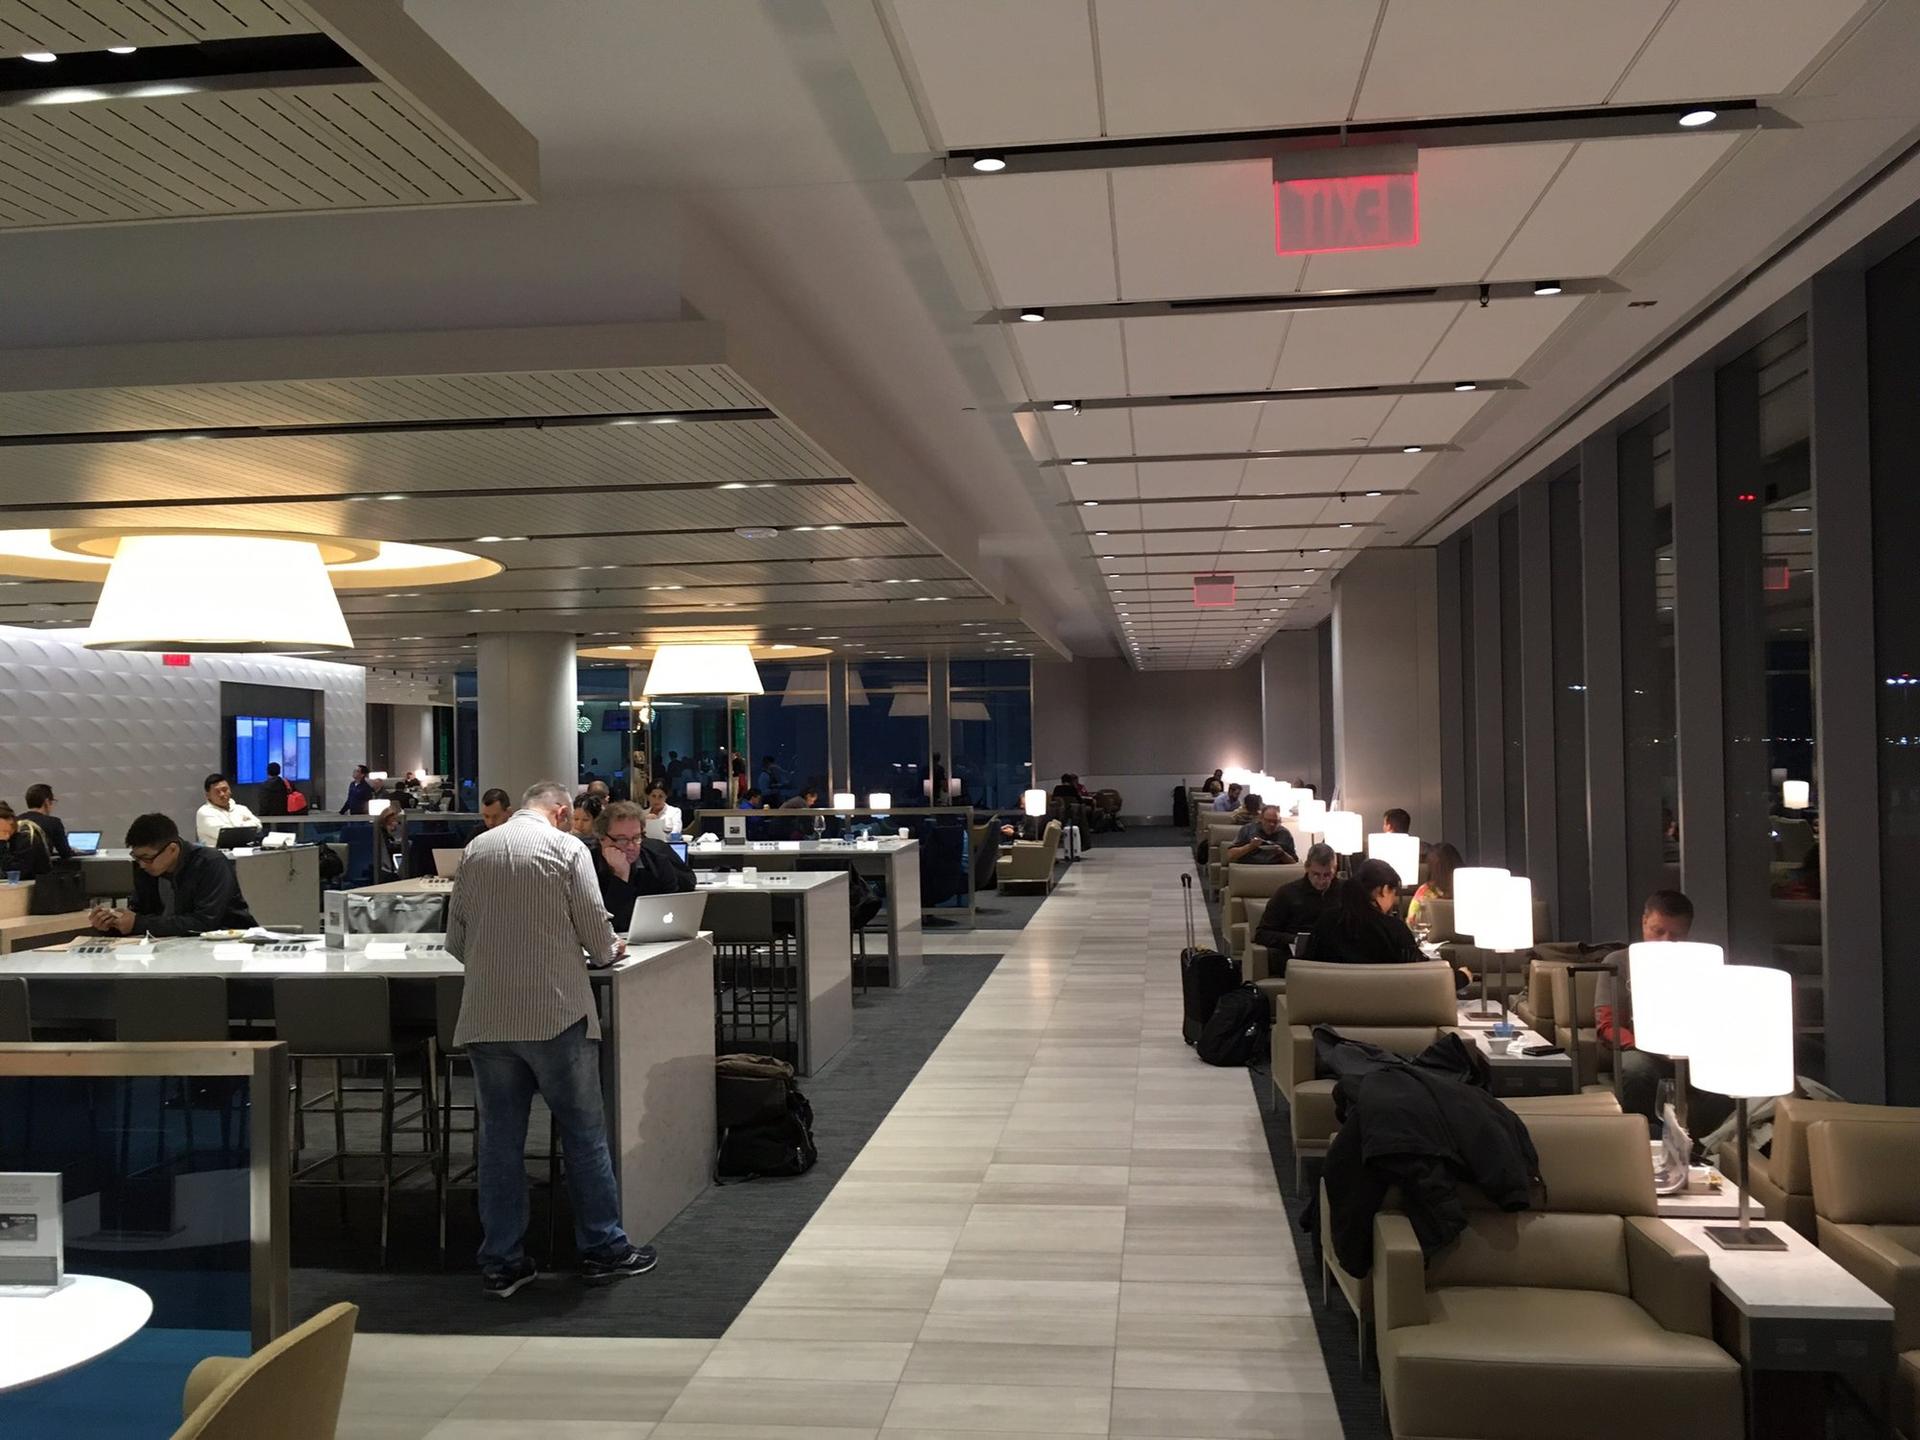 United Airlines United Club (Gate 71A) image 30 of 100